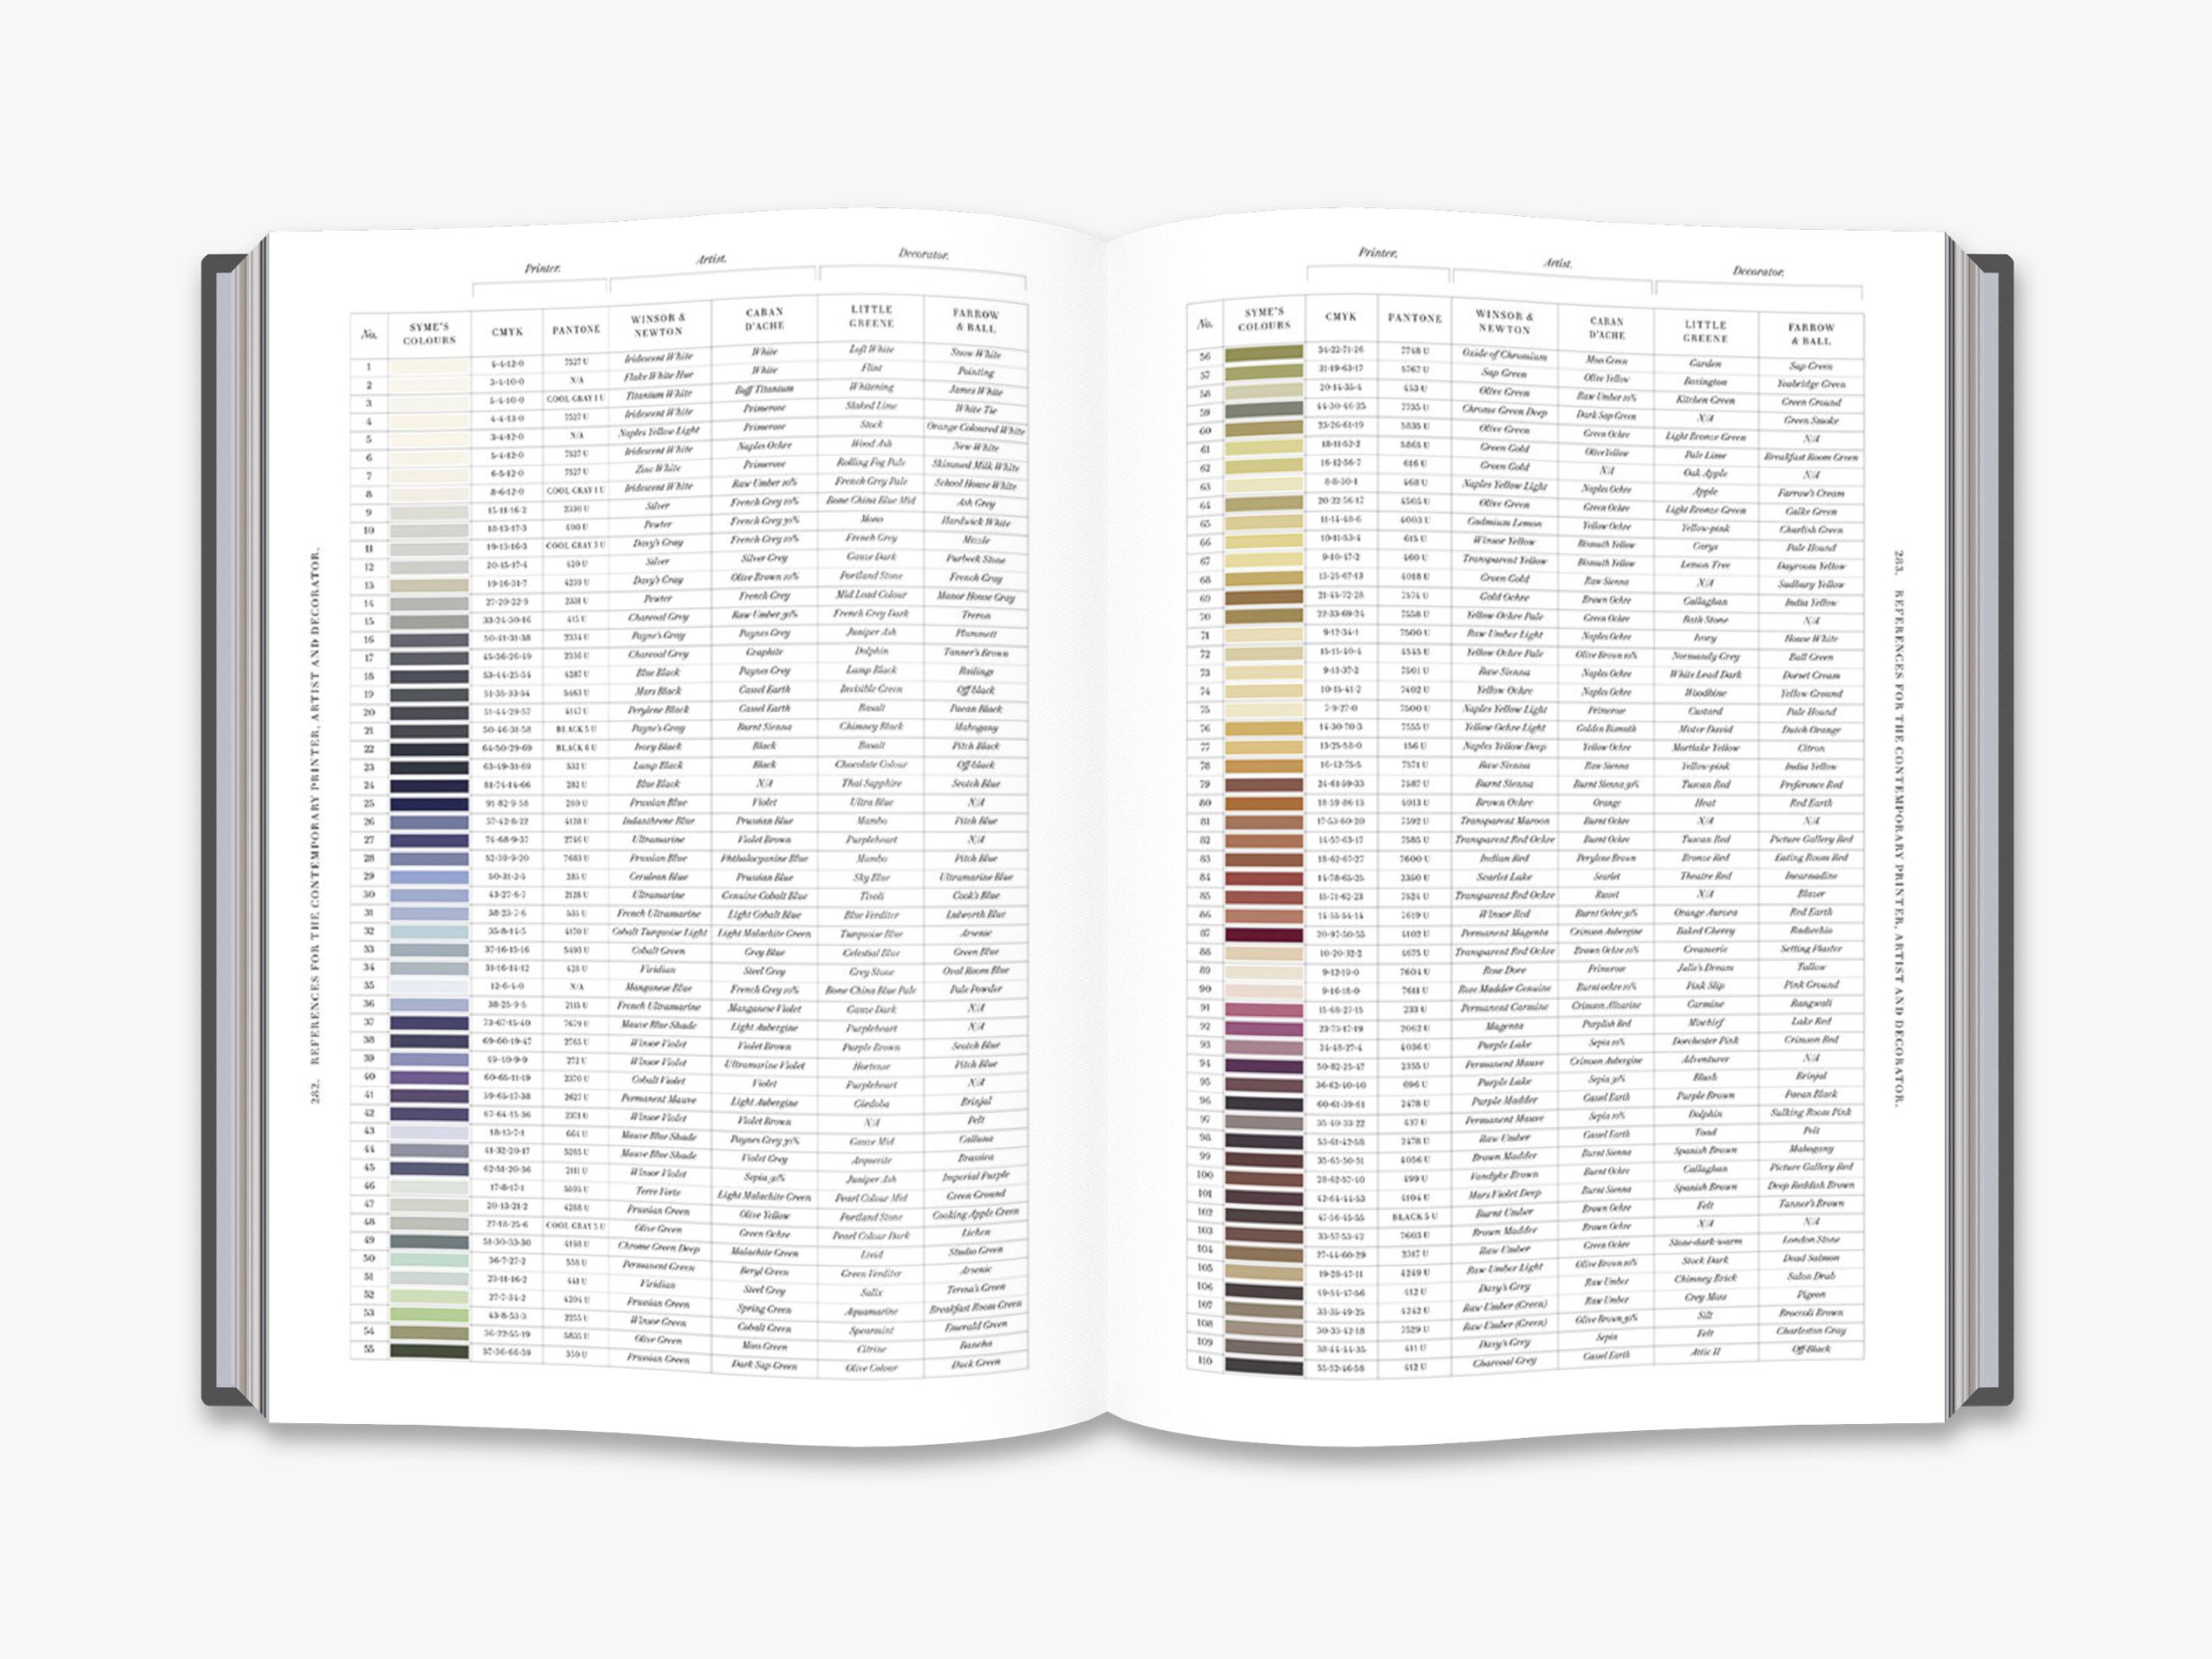 Nature's Palette: A Color Reference System from the Natural World [Book]